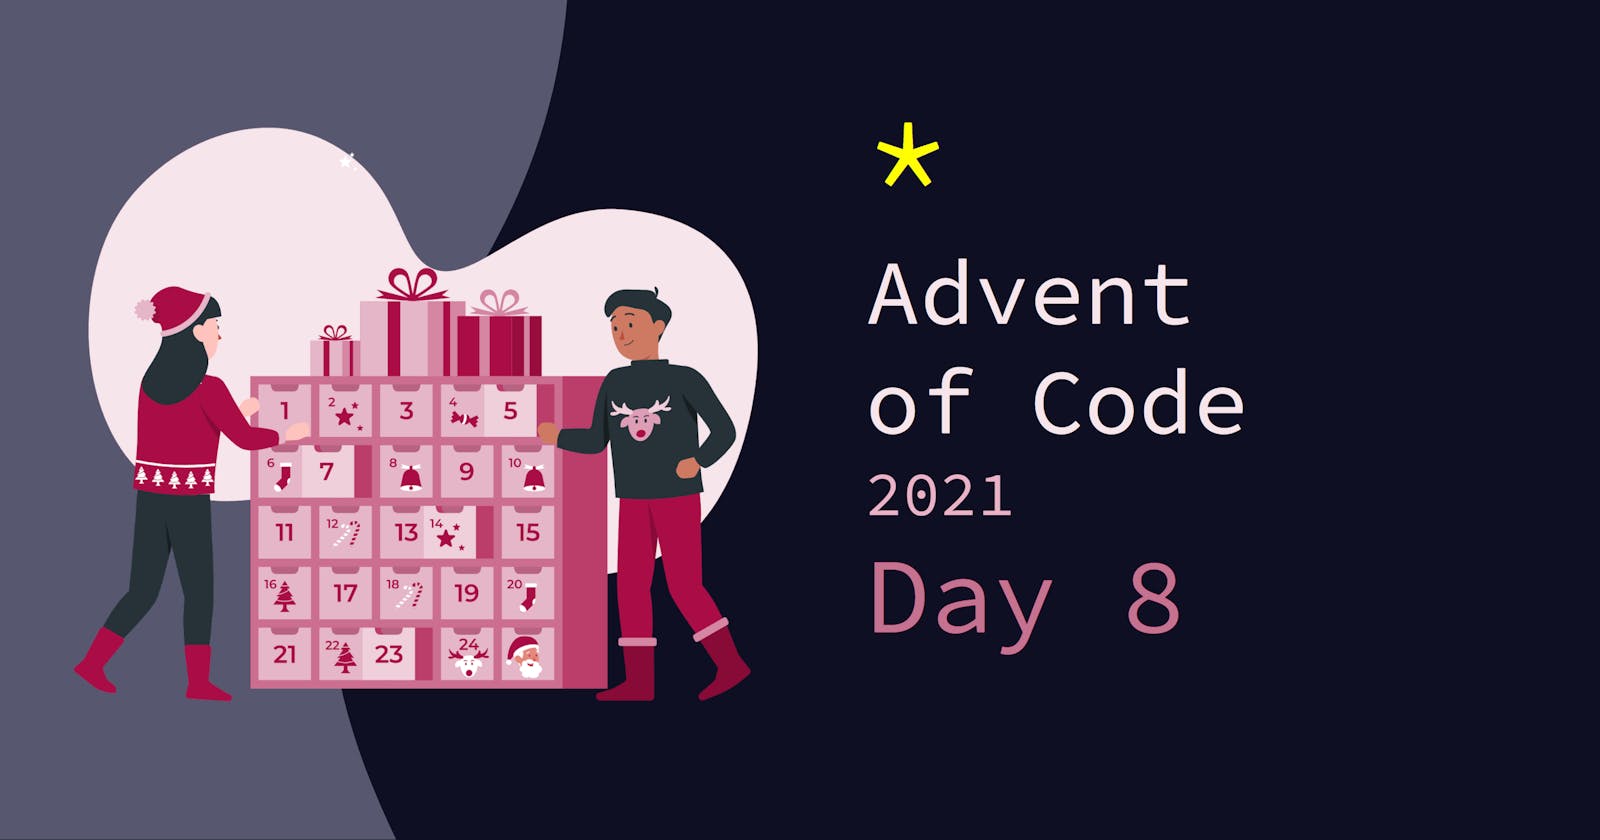 Advent of Code 2021: Day 8